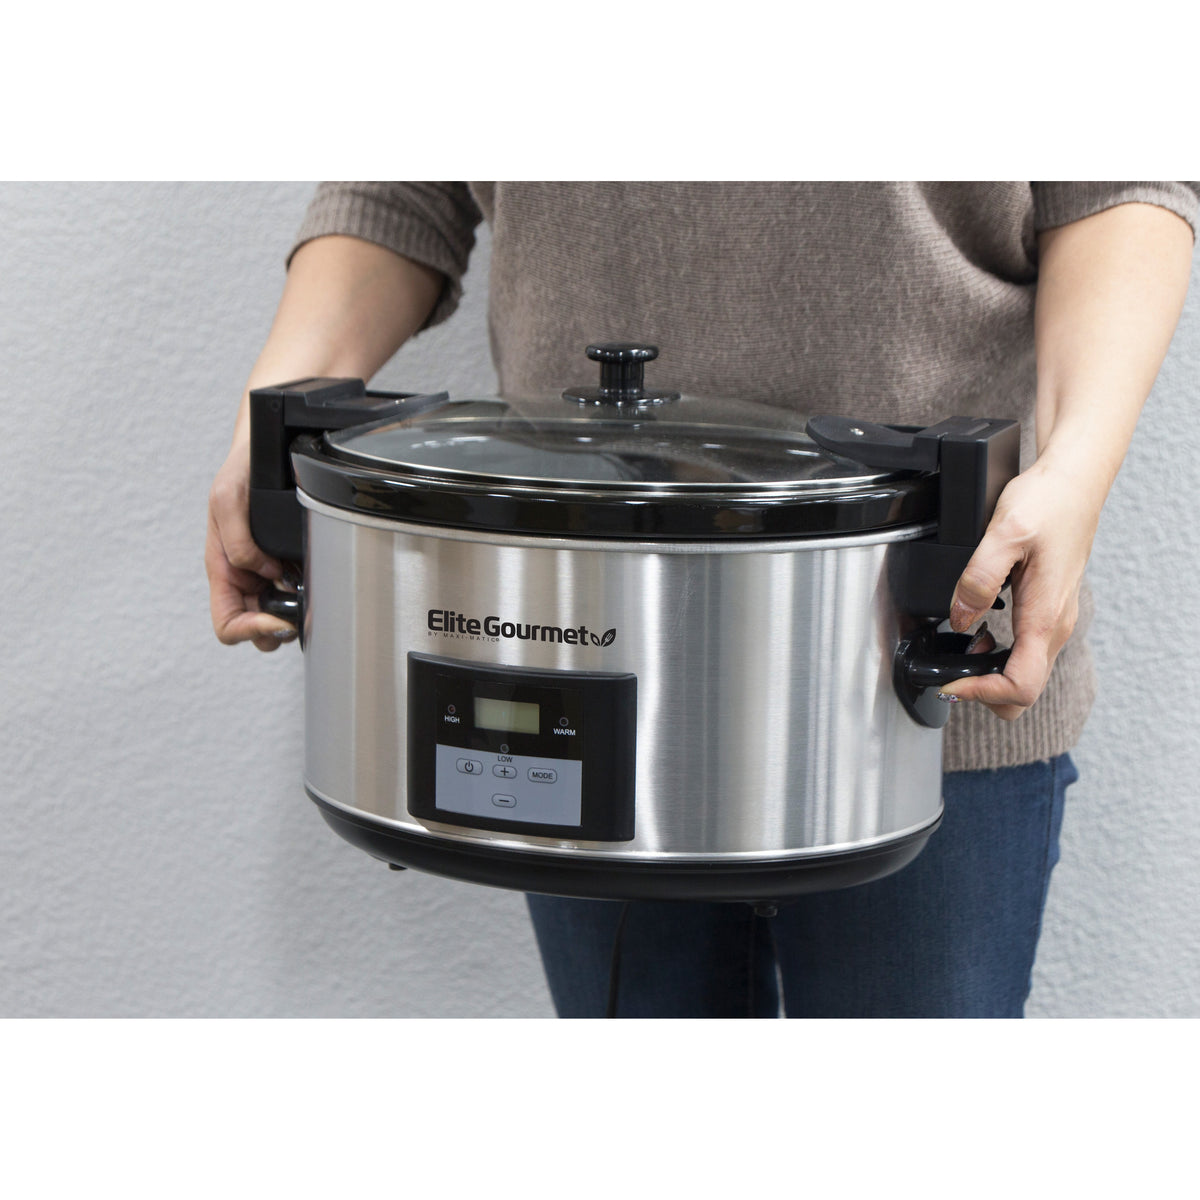 8.5 Qt. Deluxe Metallic Red Slow Cooker with Glass Lid – Shop